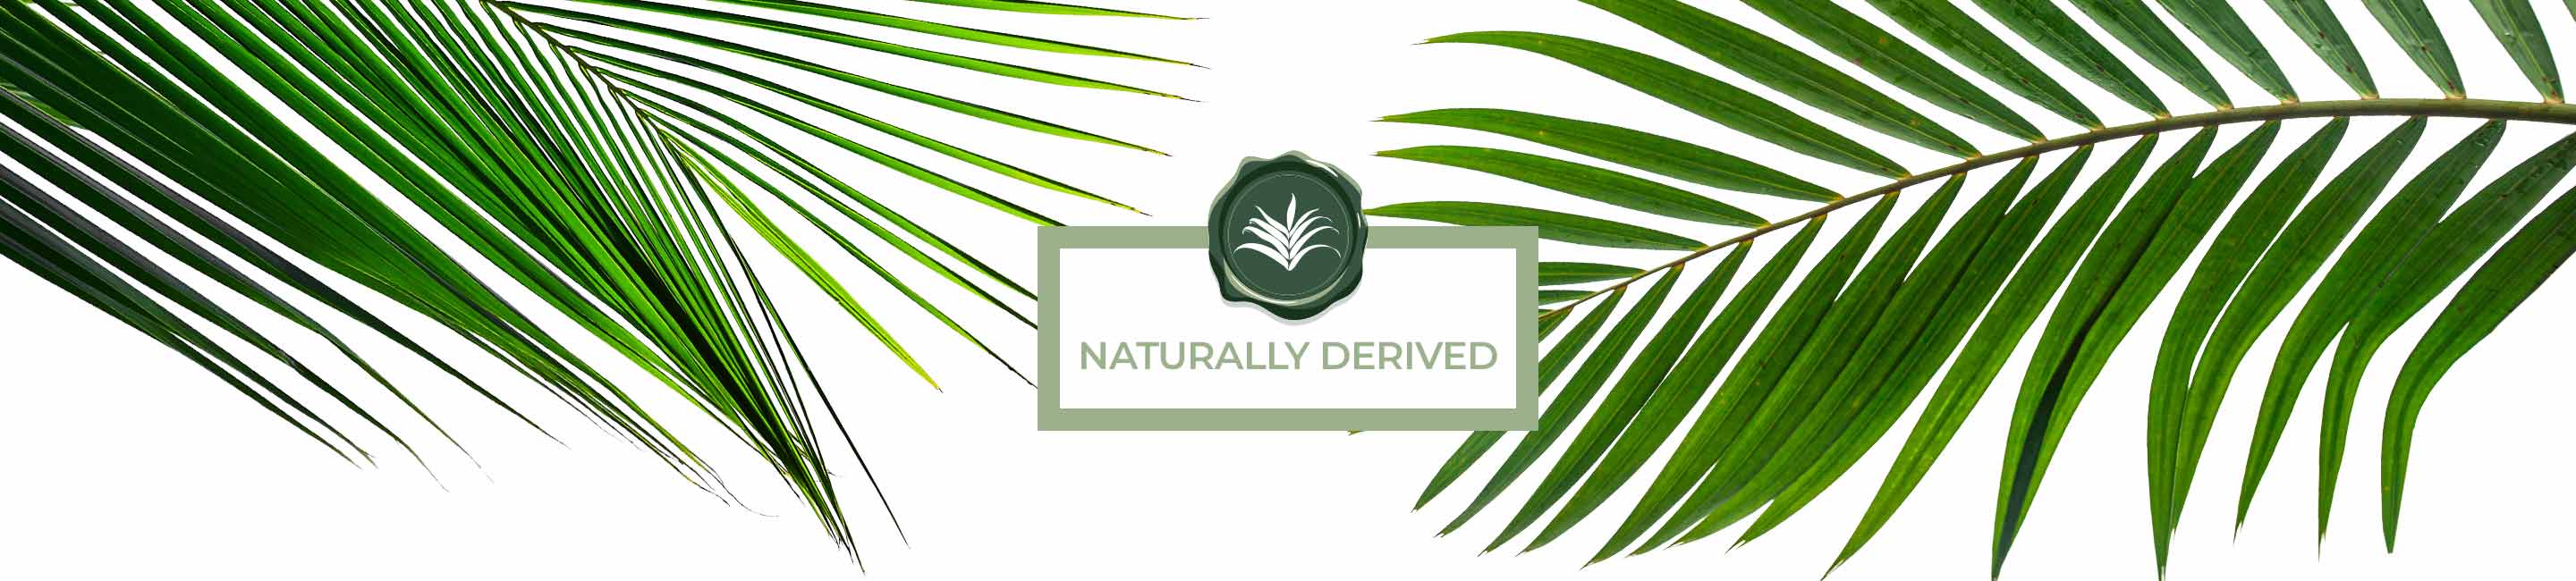 Naturally Derived Conscious Beauty Seal with a palm background